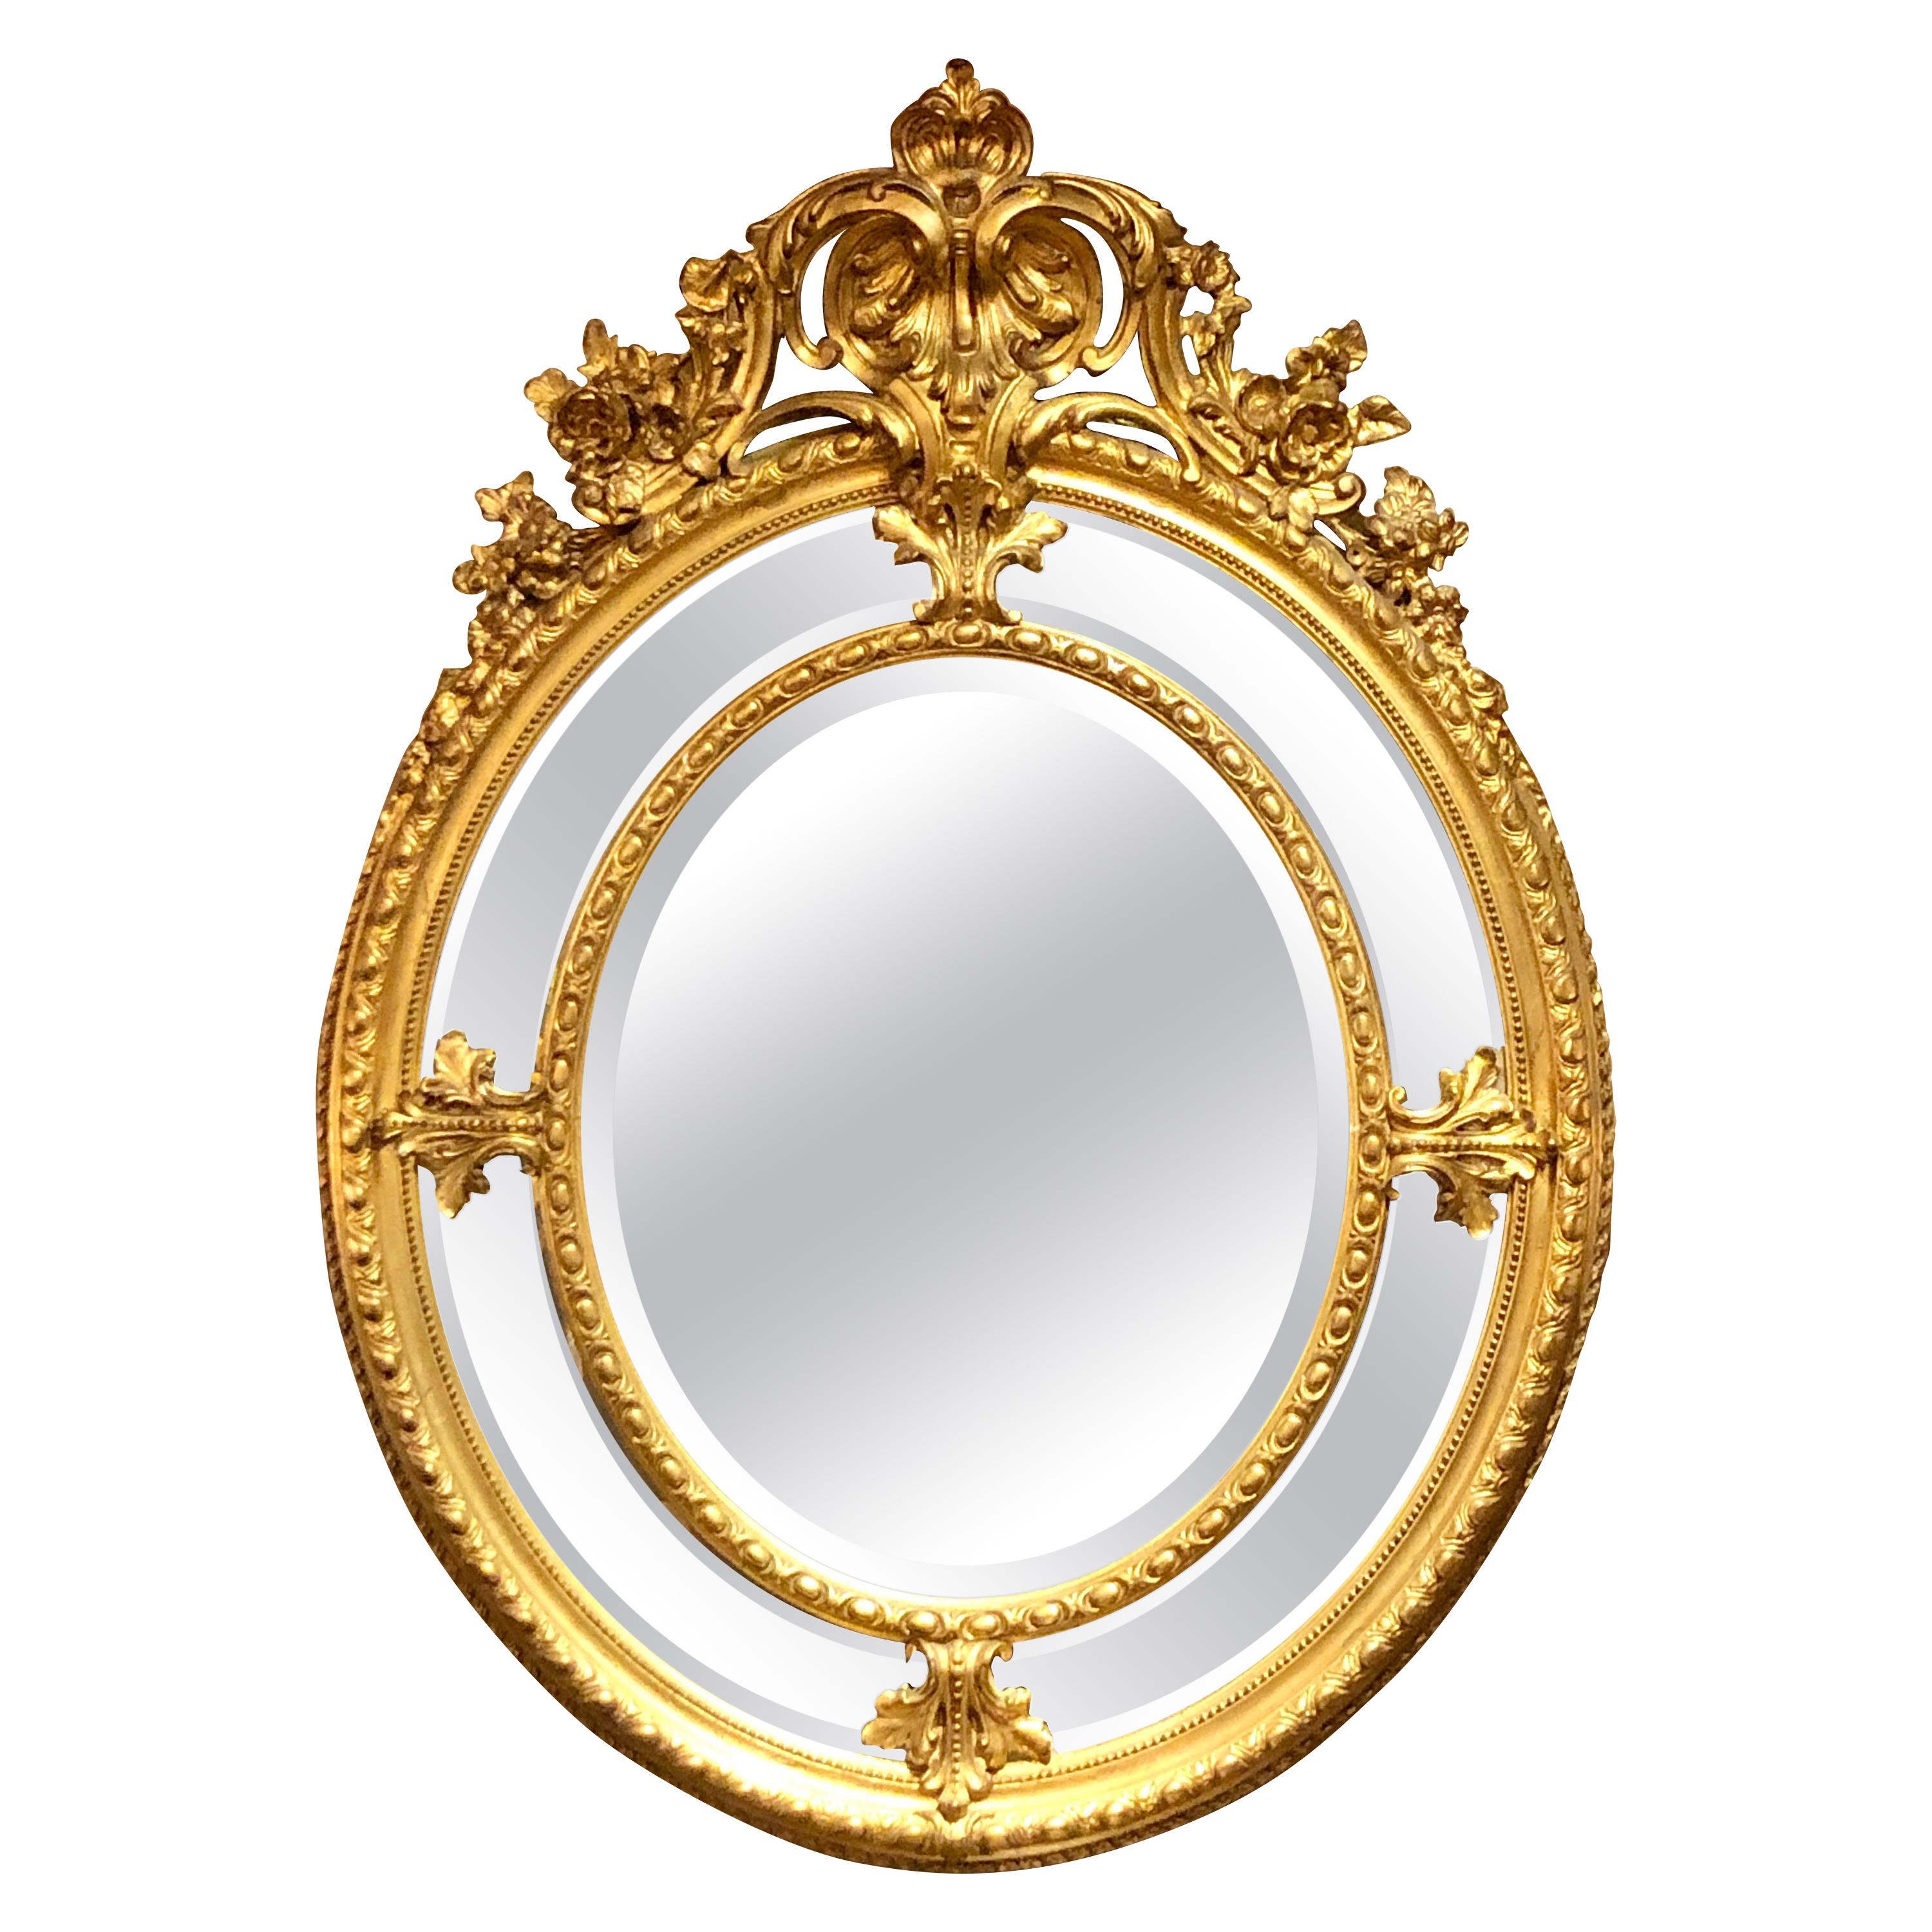 Antique French Carved Gilt Wood Oval Mirror with Beveling, circa 1870-1890